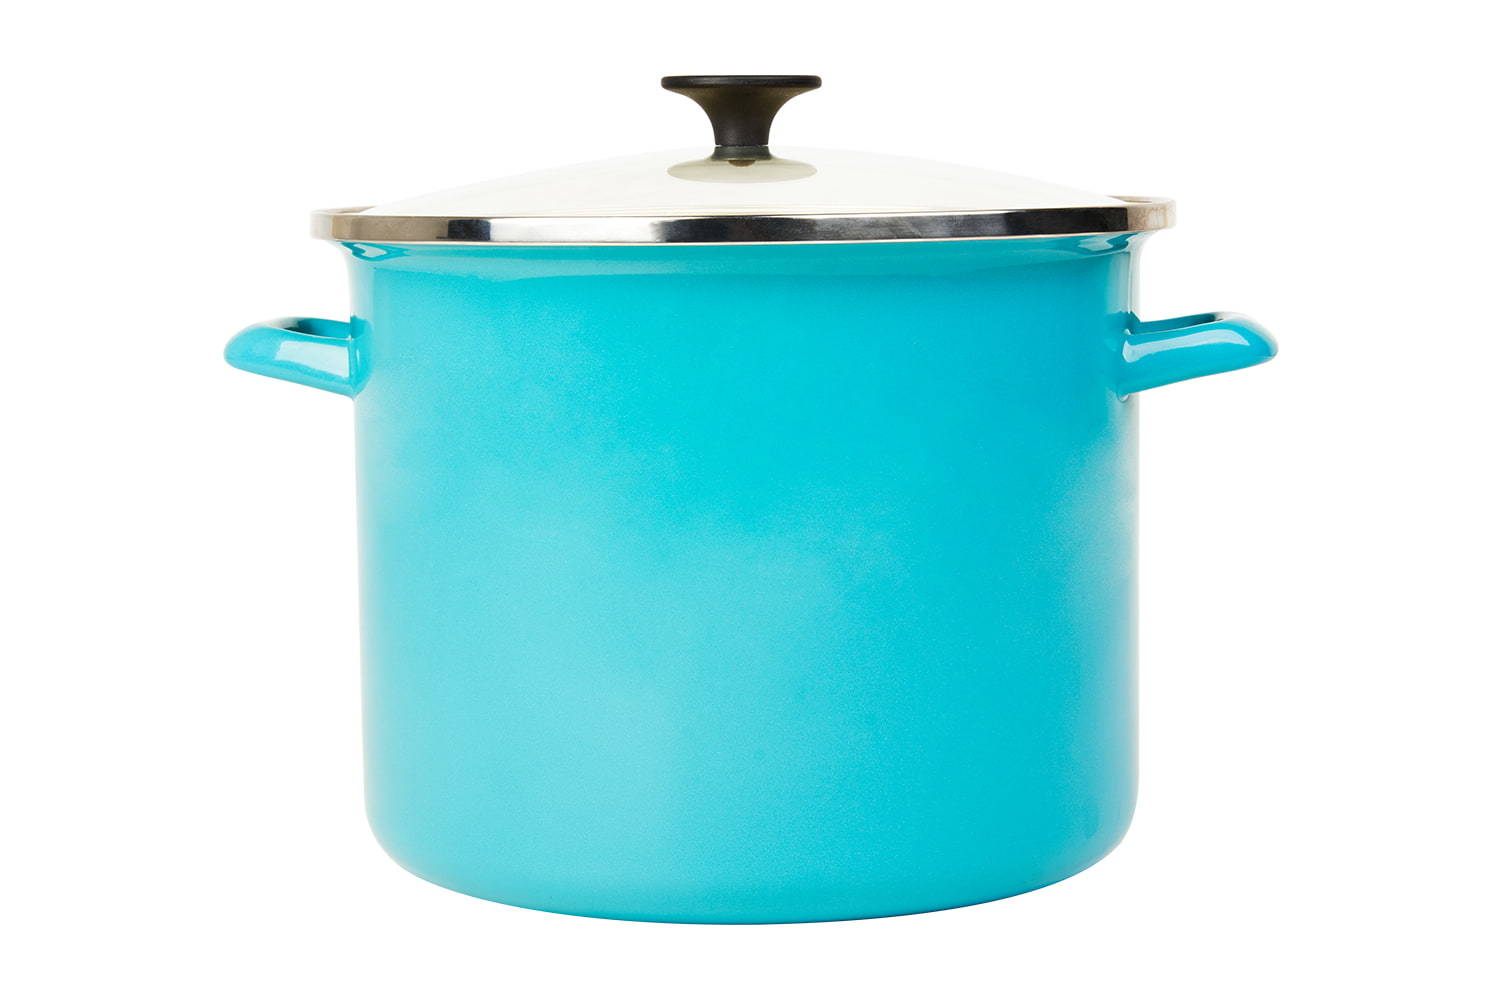 12qt/26cm Cookware Enameled steel pot with Handle and lid, XL large, Specialty Nonstick